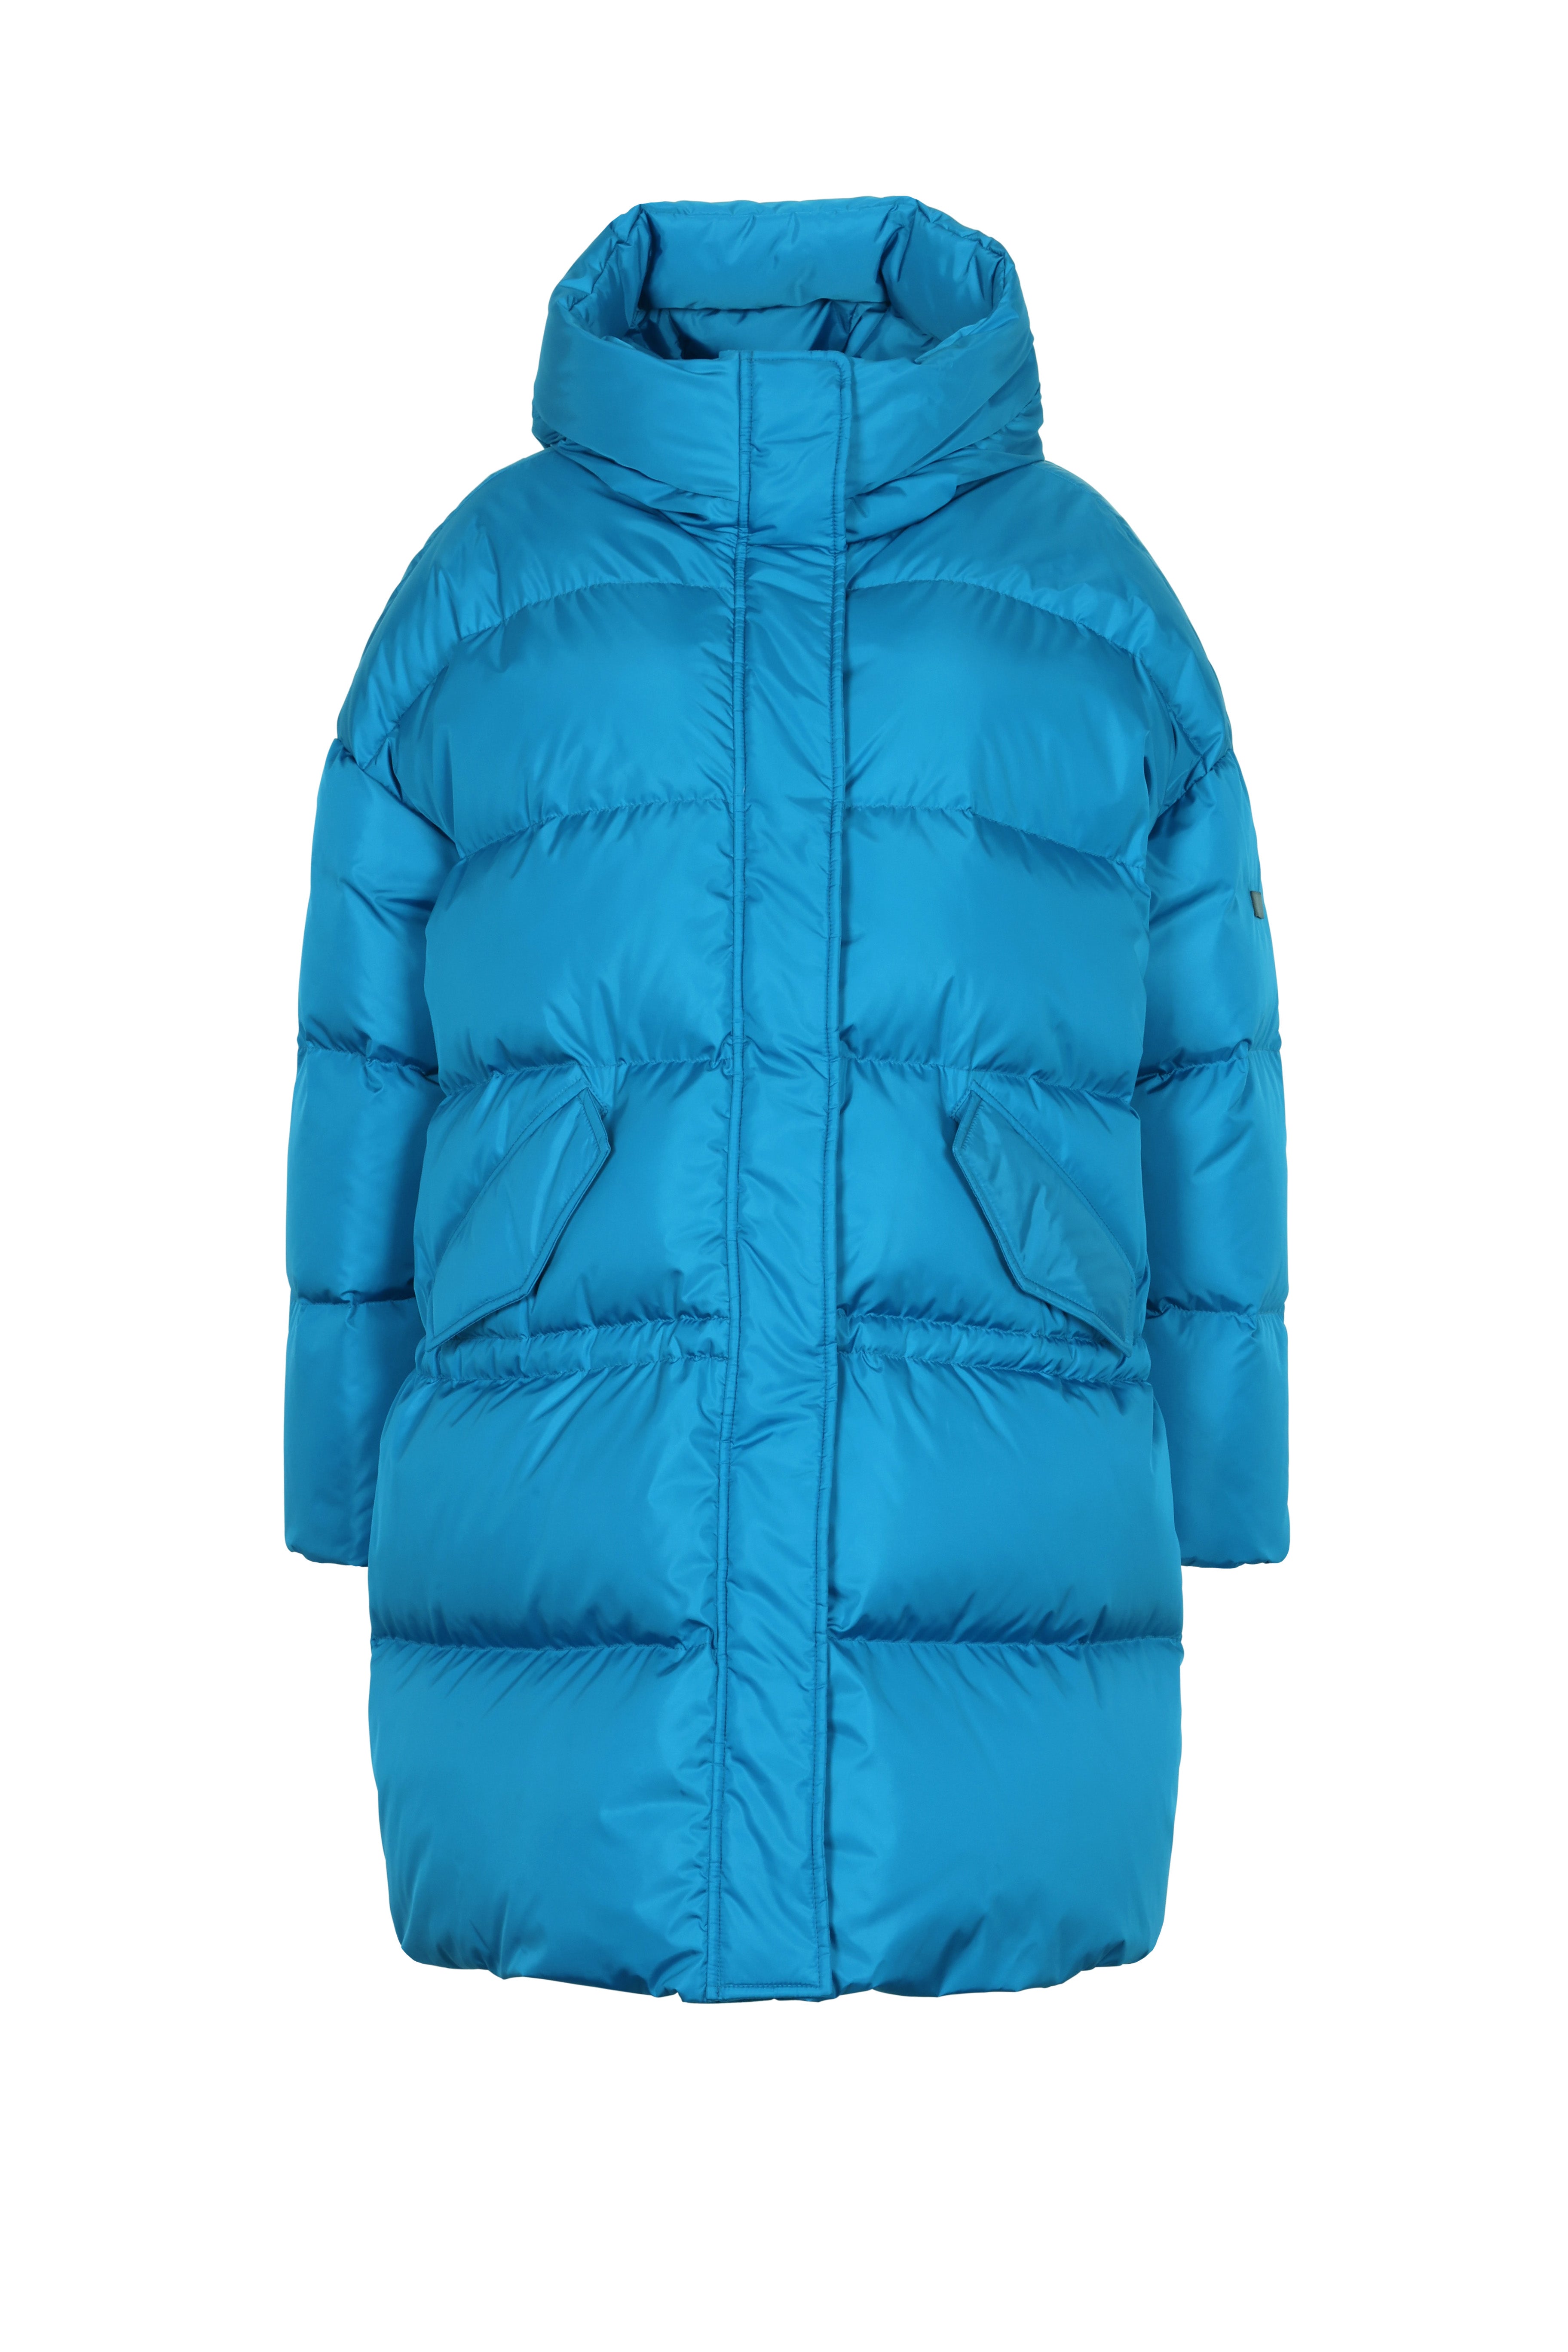 oversized Lempelius down parka in the color skyblue 